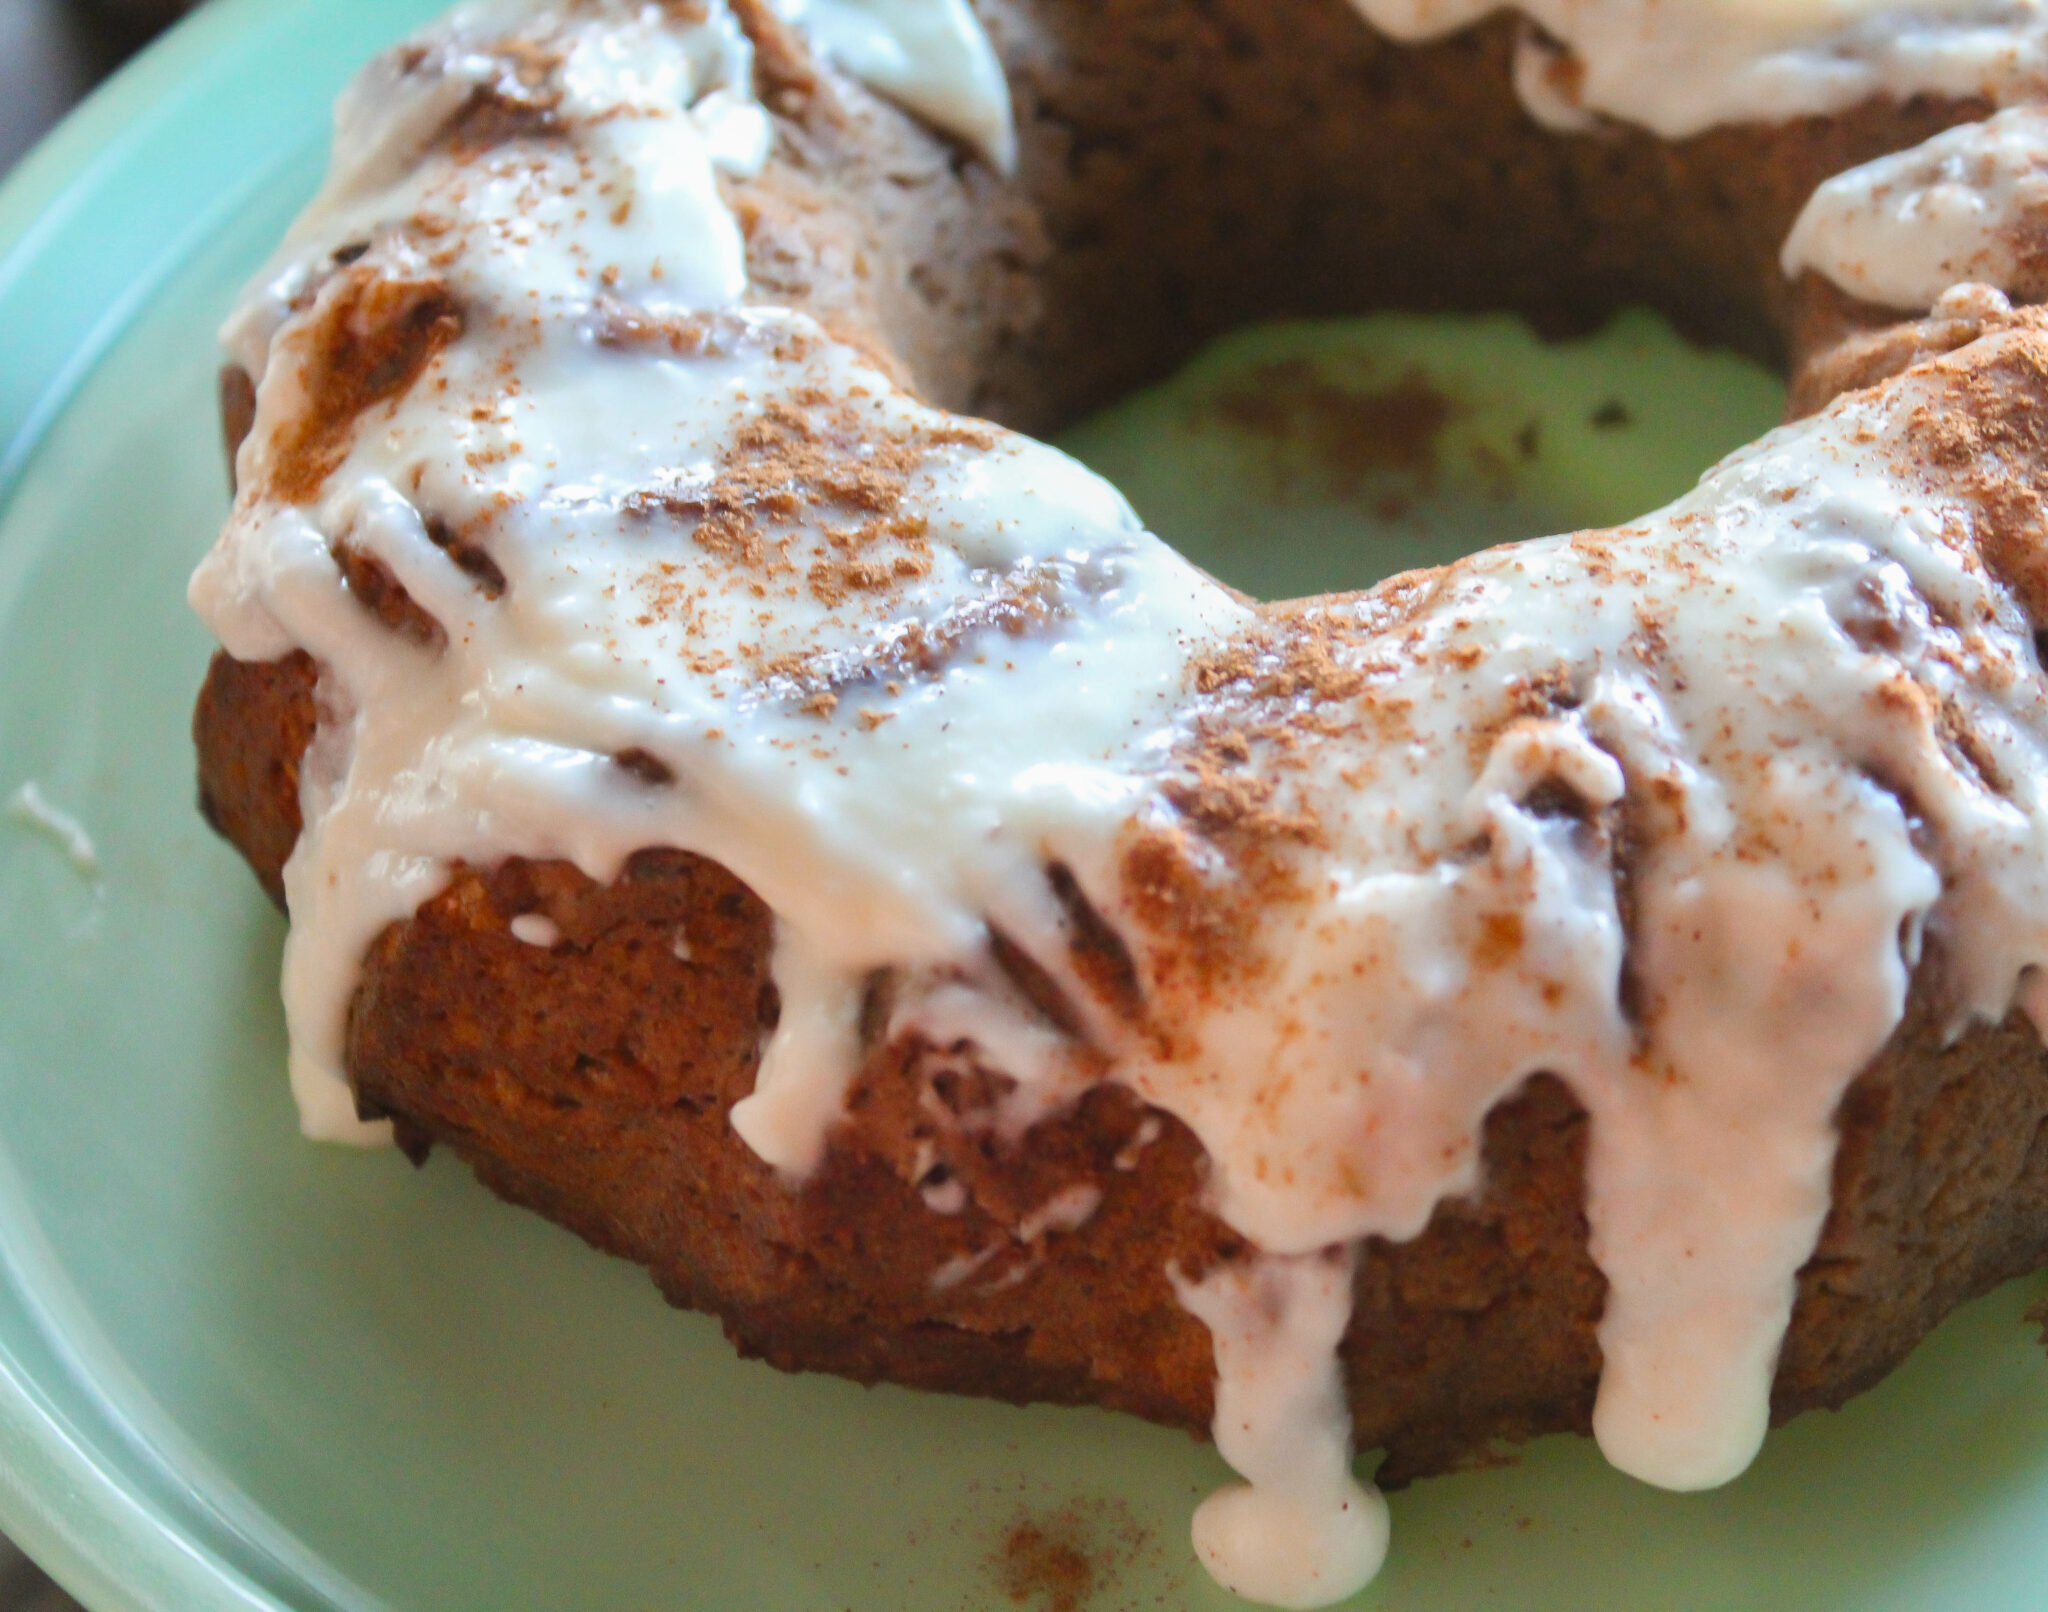 My Pumpkin Spice Coffee Cake is the perfect Fall treat! A perfectly spiced cake topped with a creamy glaze. What could be better? 